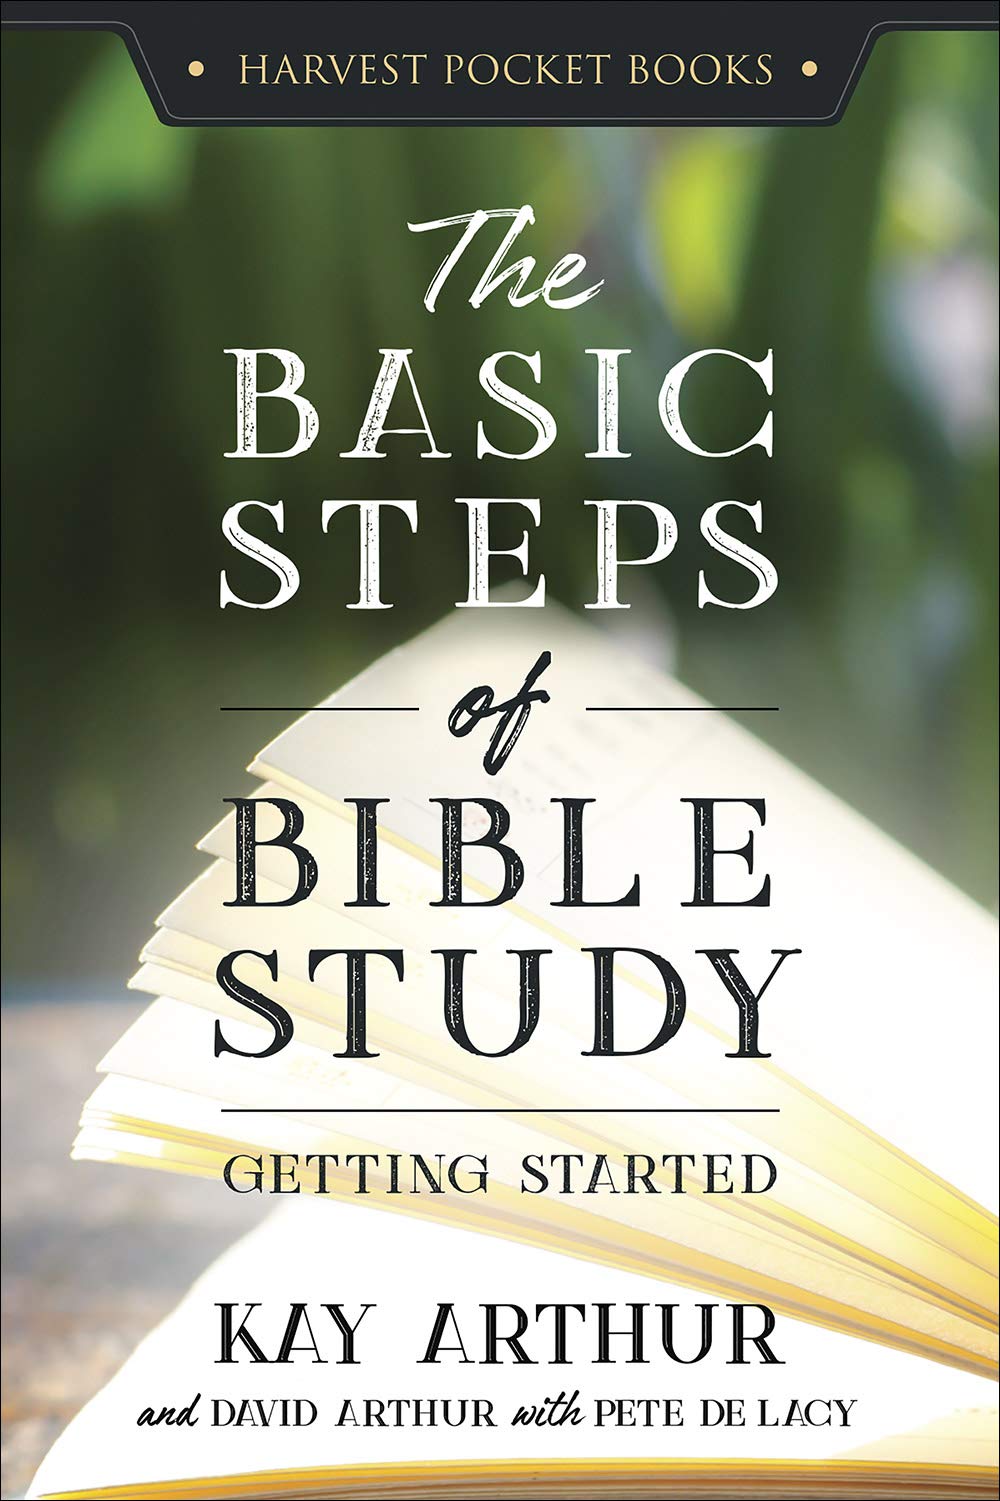 The Basic Steps of Bible Study: Getting Started (Harvest Pocket Books)